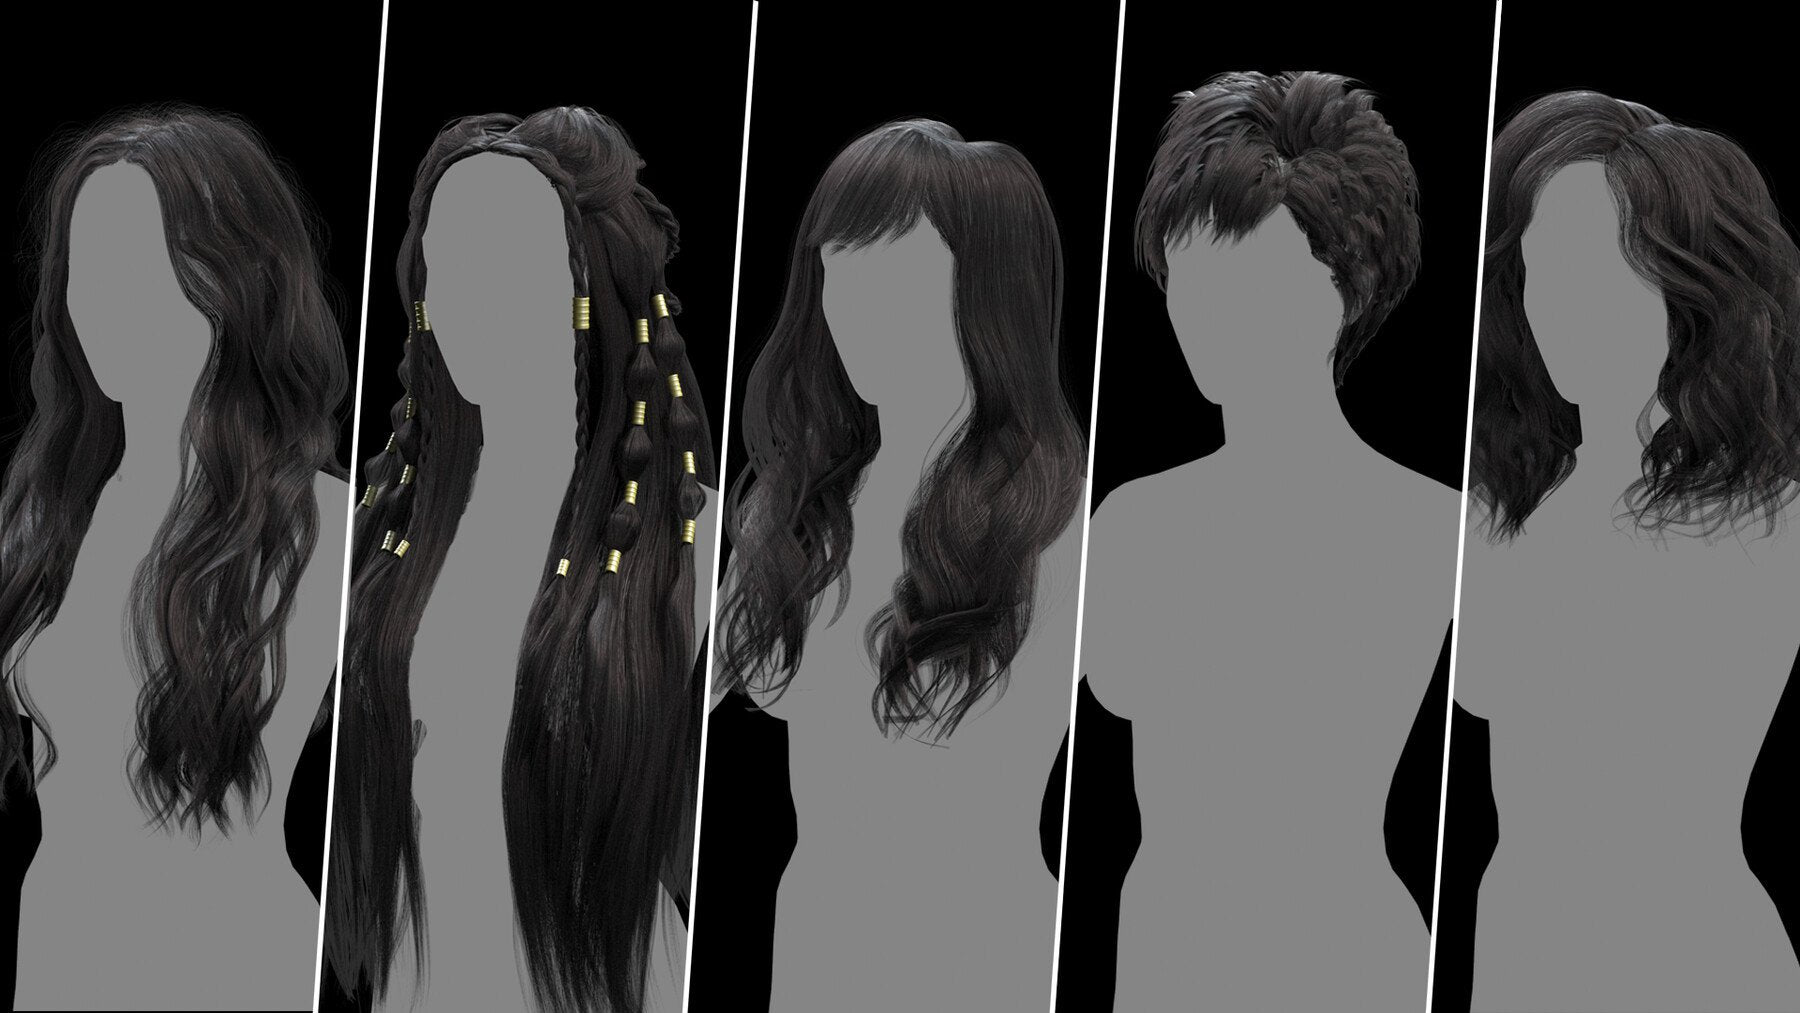 40 Female Hair Cards Collection